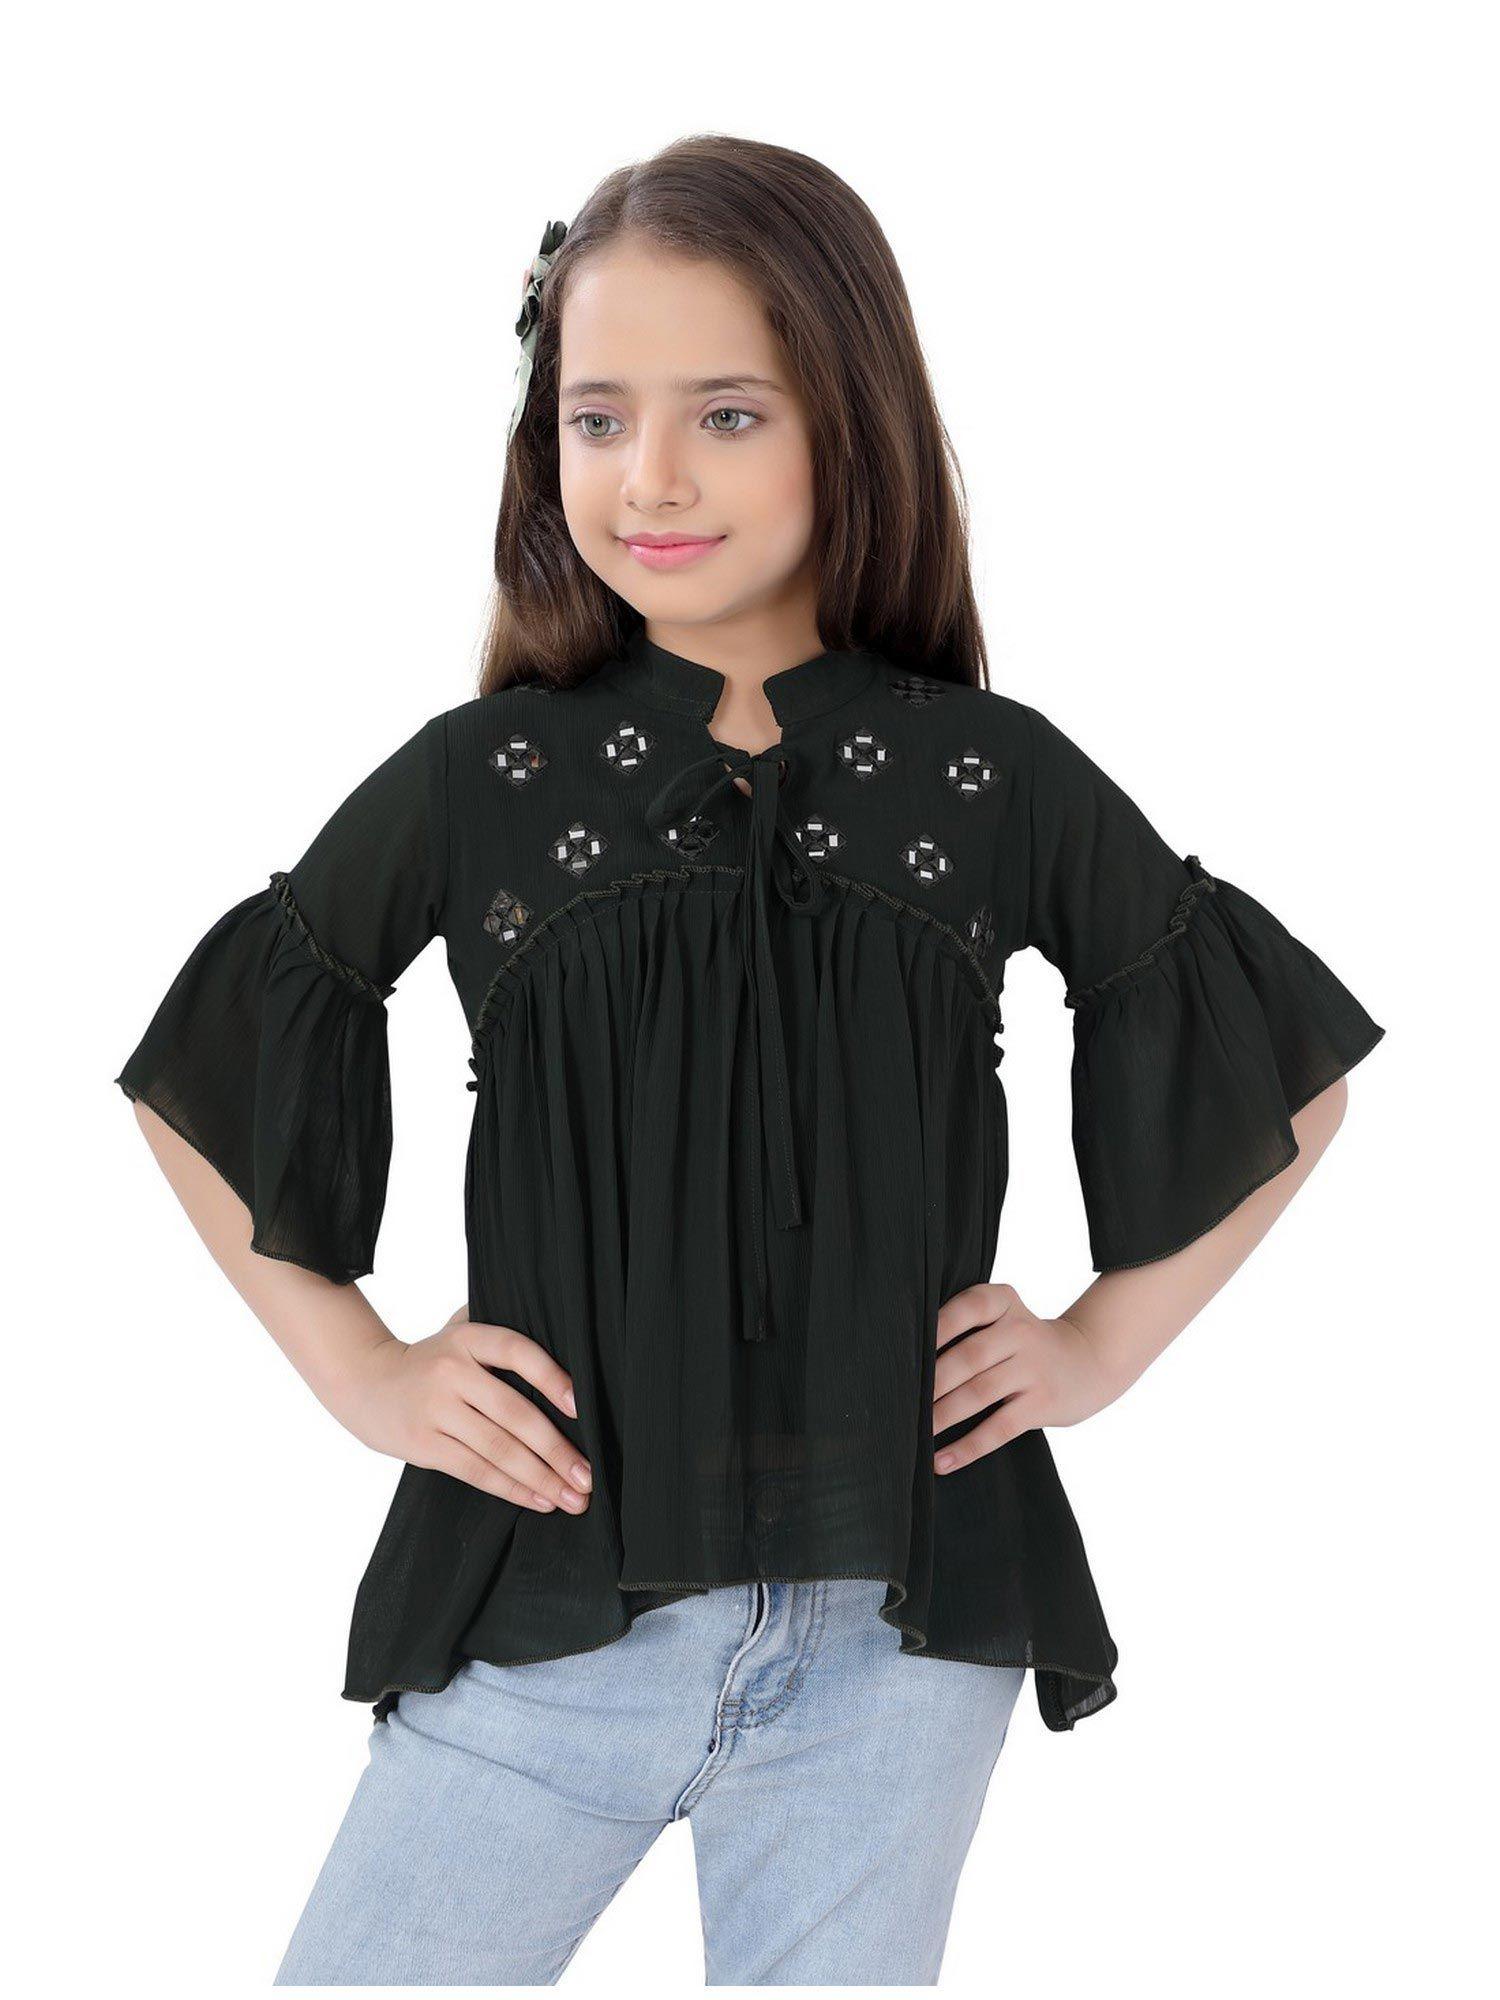 pleated cotton regular length top for girls - green